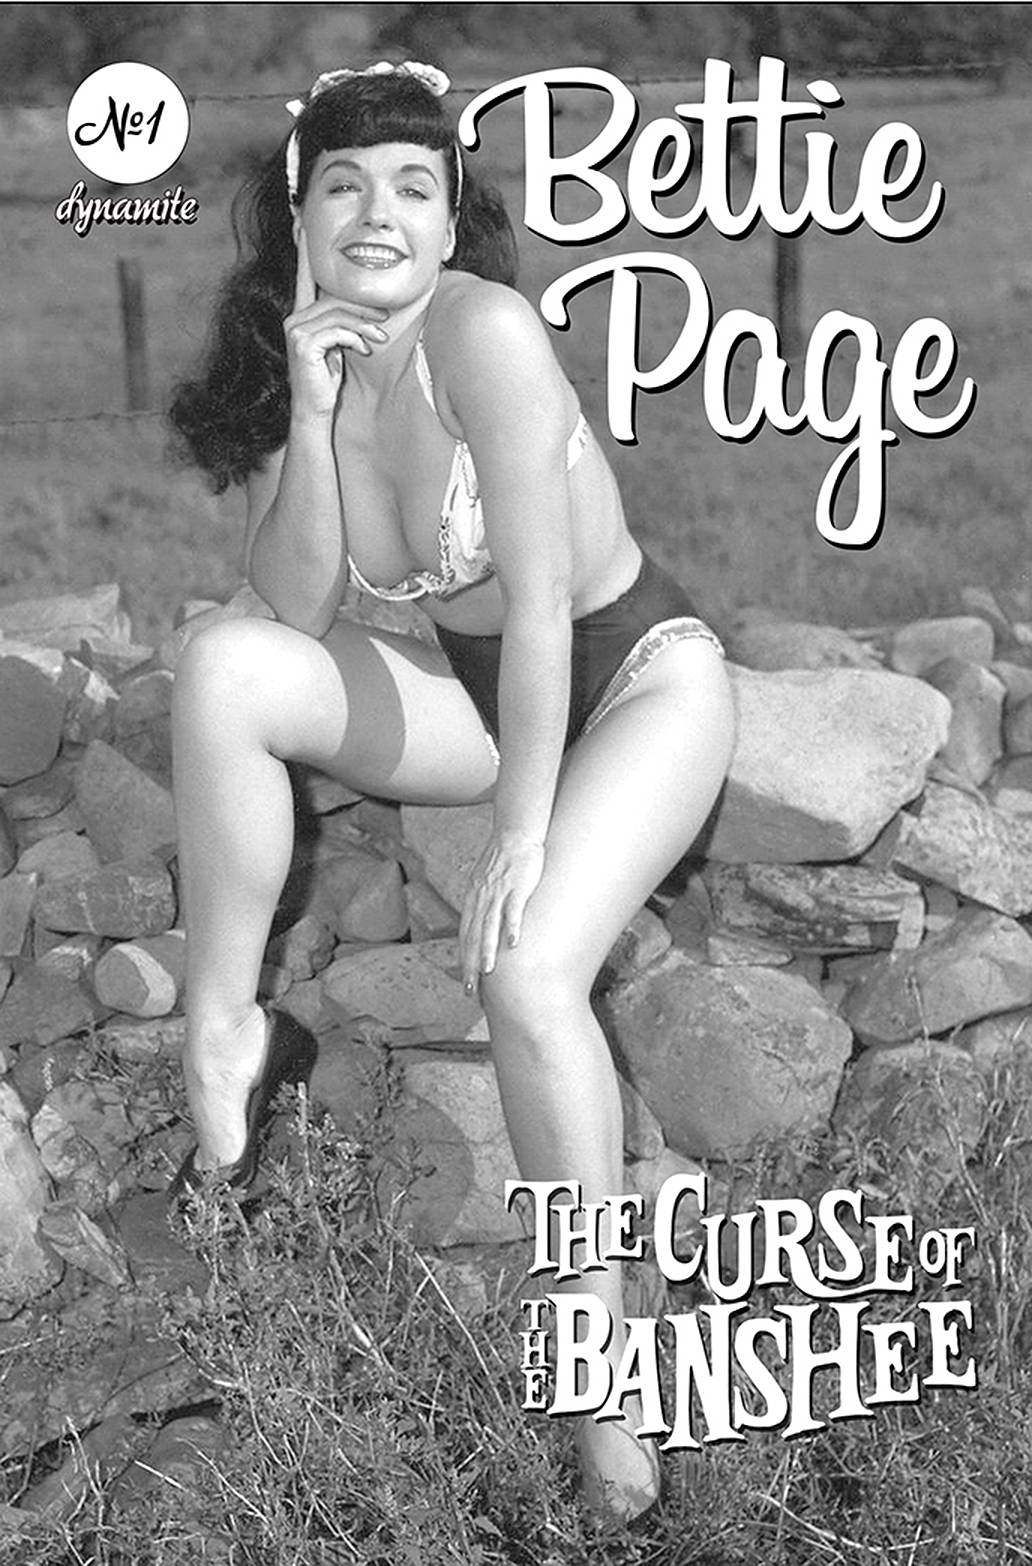 BETTIE PAGE & CURSE OF THE BANSHEE #1 CVR E BETTIE PAGE PIN